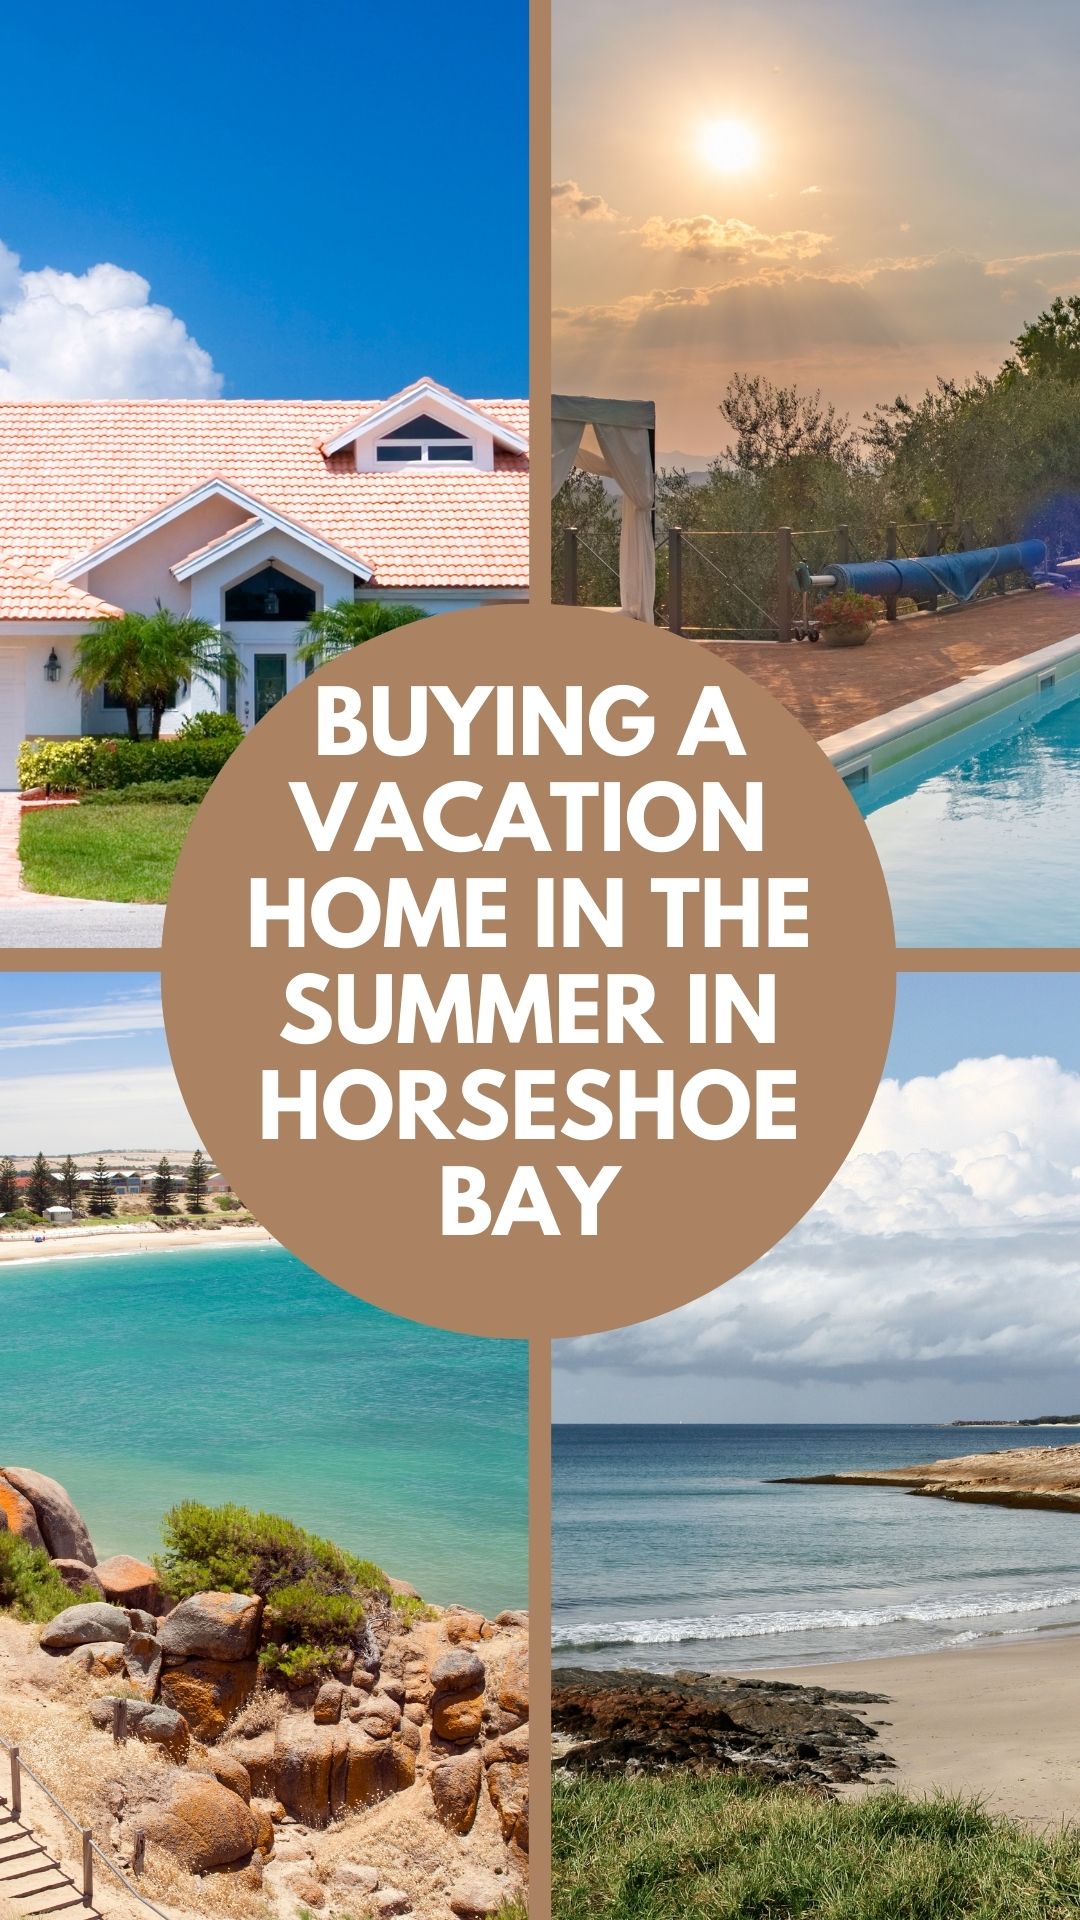 Buying a Vacation Home in the Summer in Horseshoe Bay